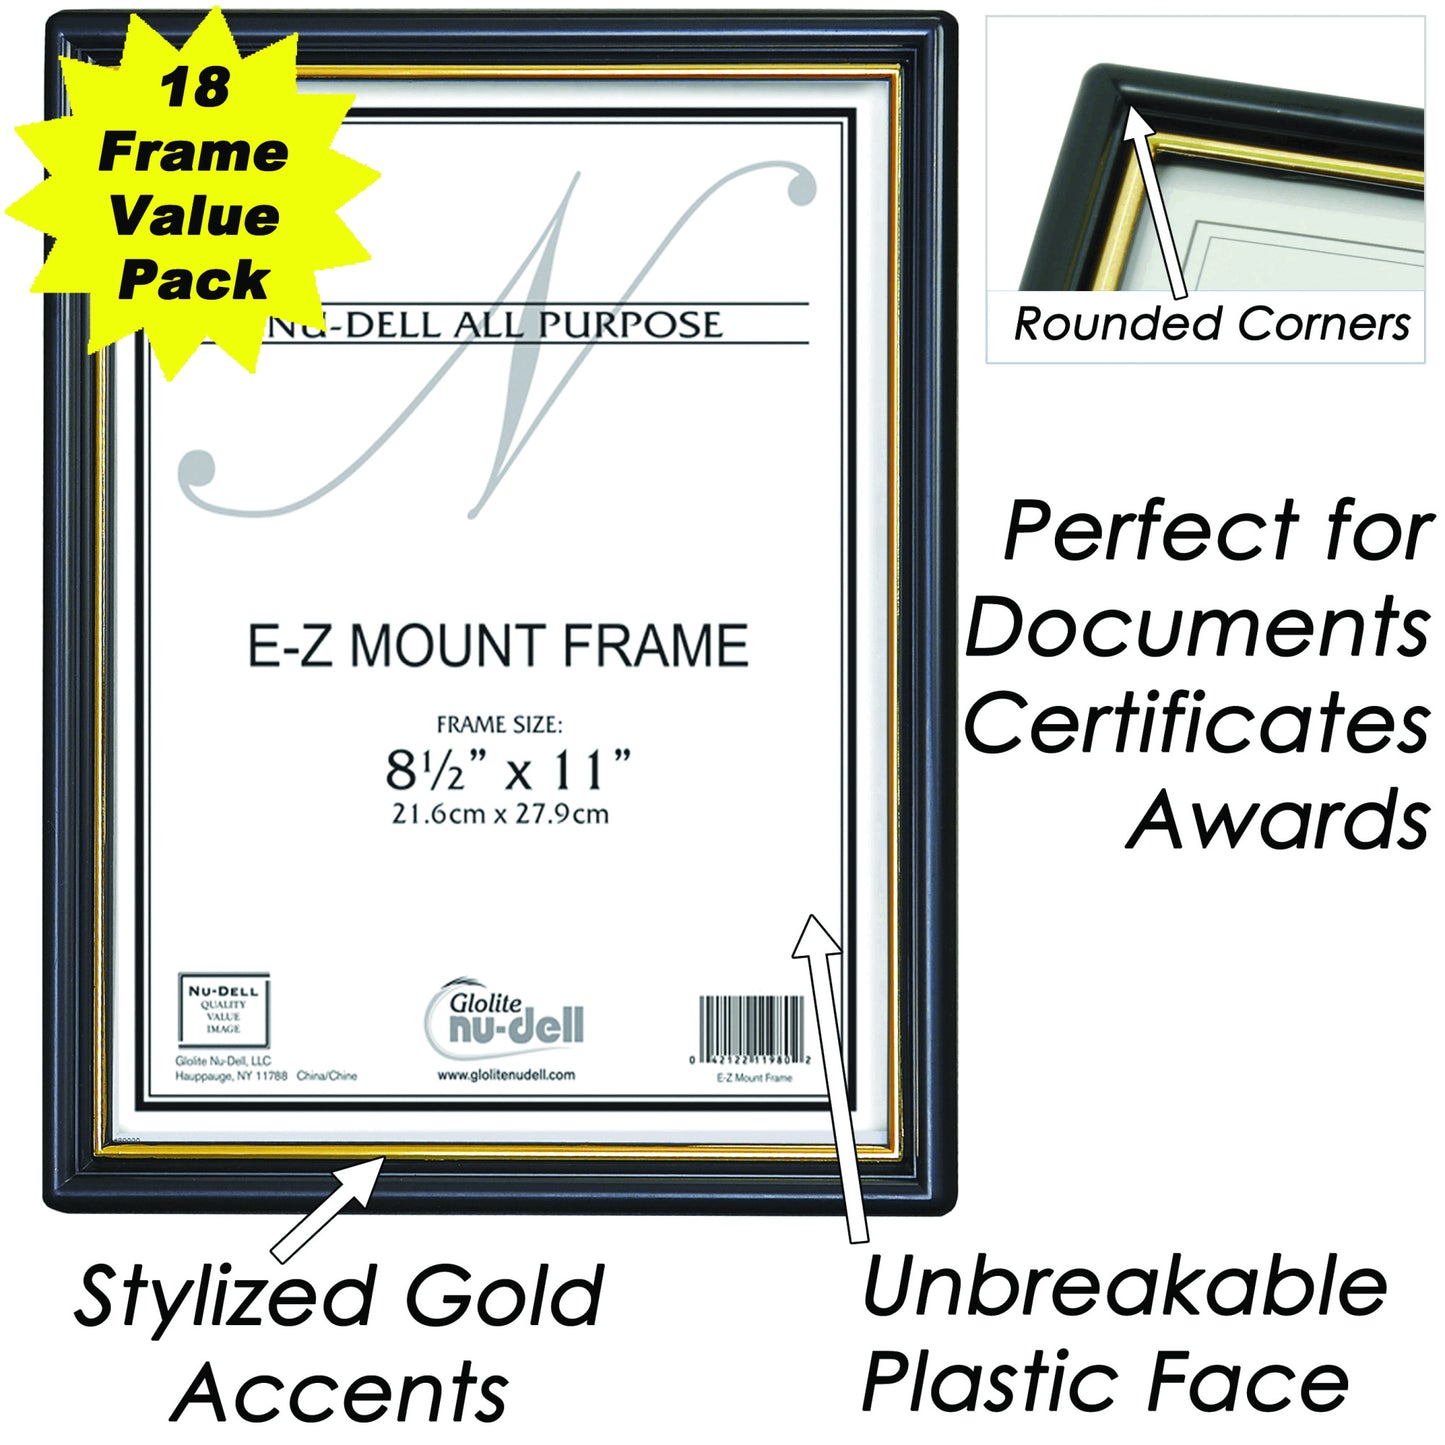 EZ Mount Document Frame 8.5" x 11", Black with Gold Trim, 18 Pack